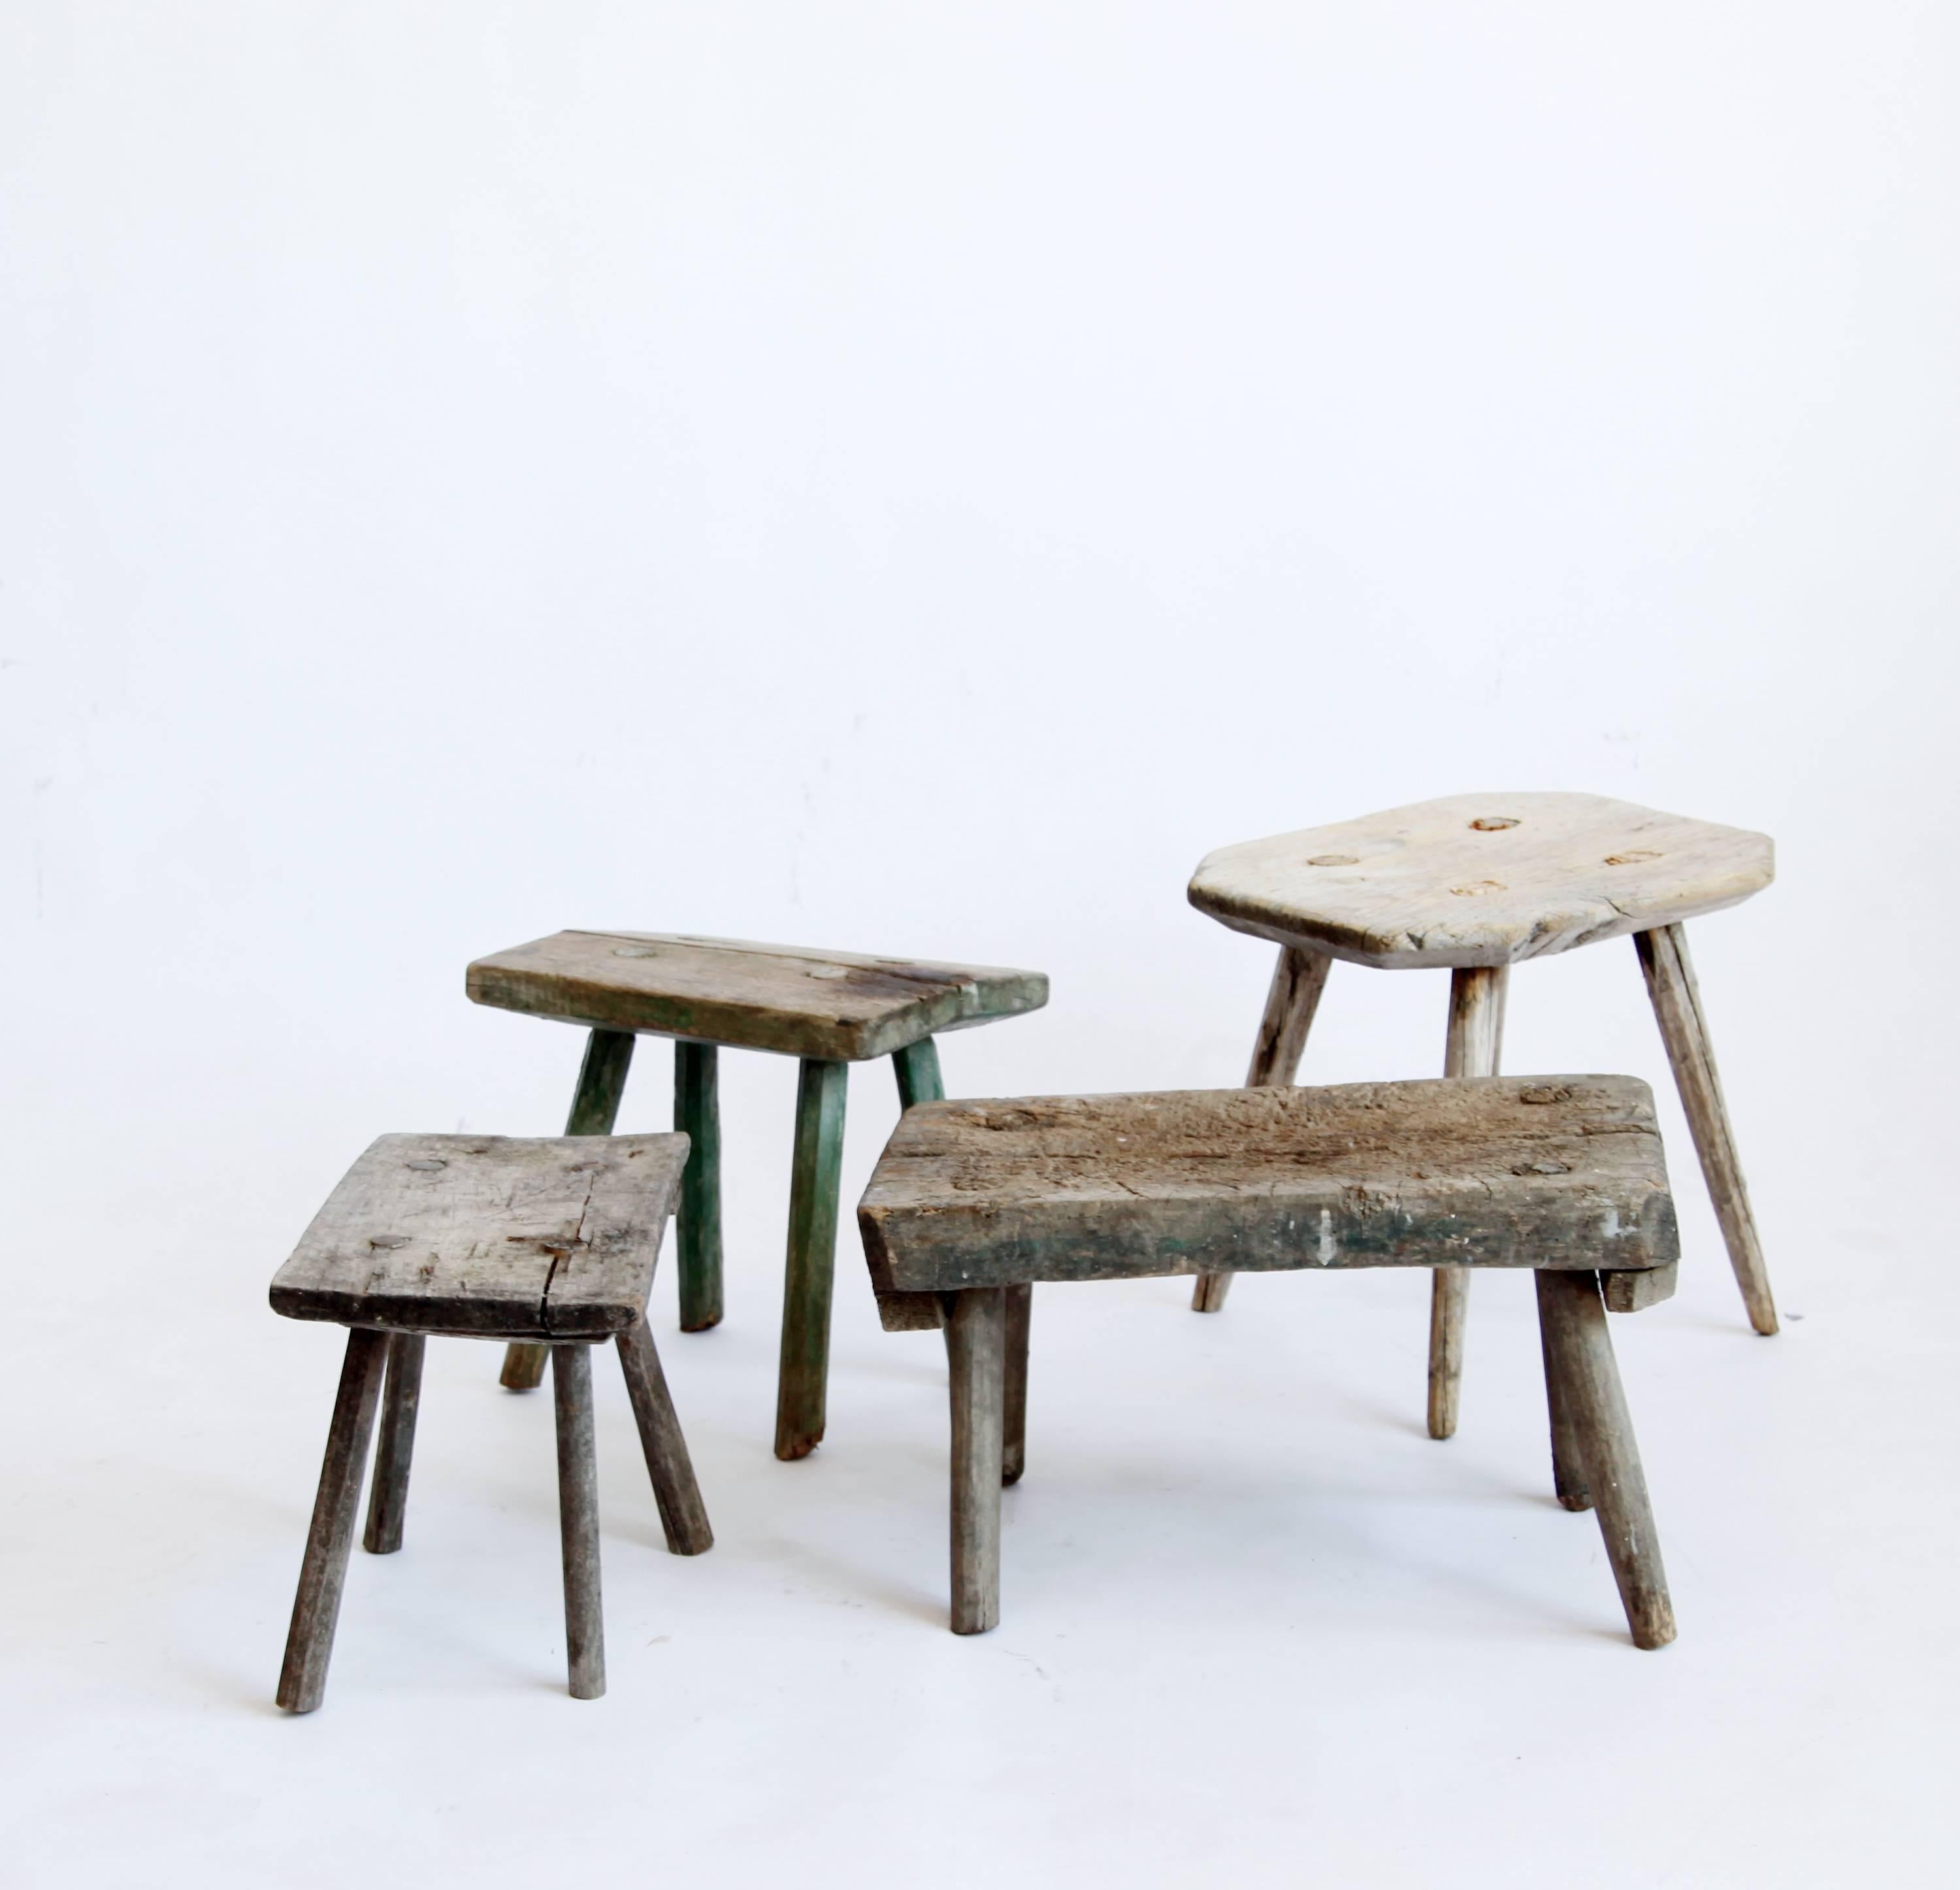 These low work stools will introduce a note of rough country elegance into any interior. They show the hands that made and used them. We love the variations in color and patina, and haven't done a thing to the surface, only stabilizing the legs.